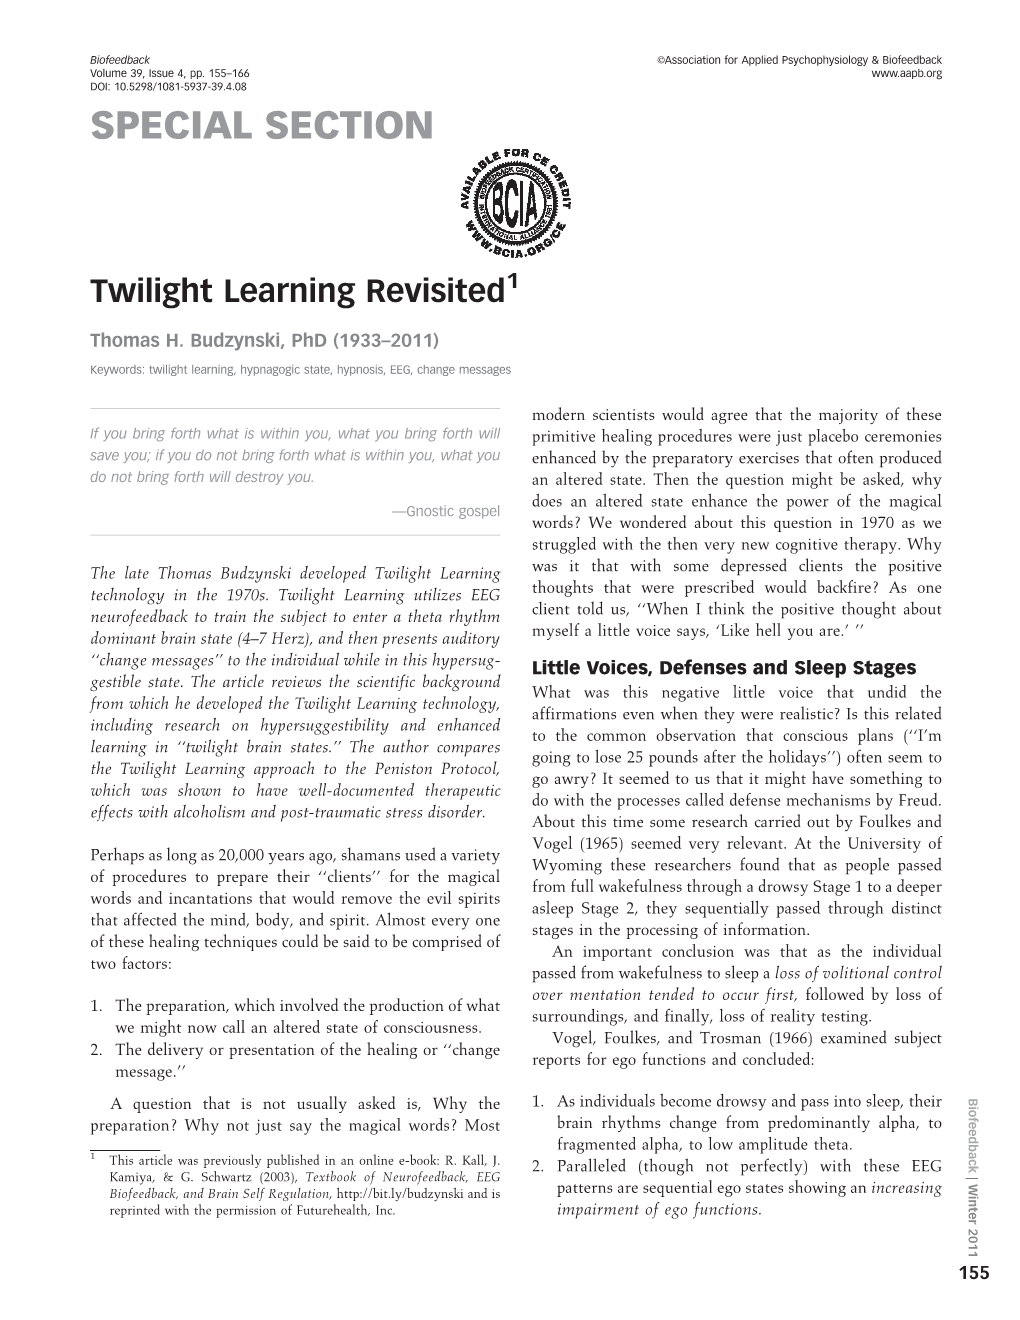 Twilight Learning Revisited1